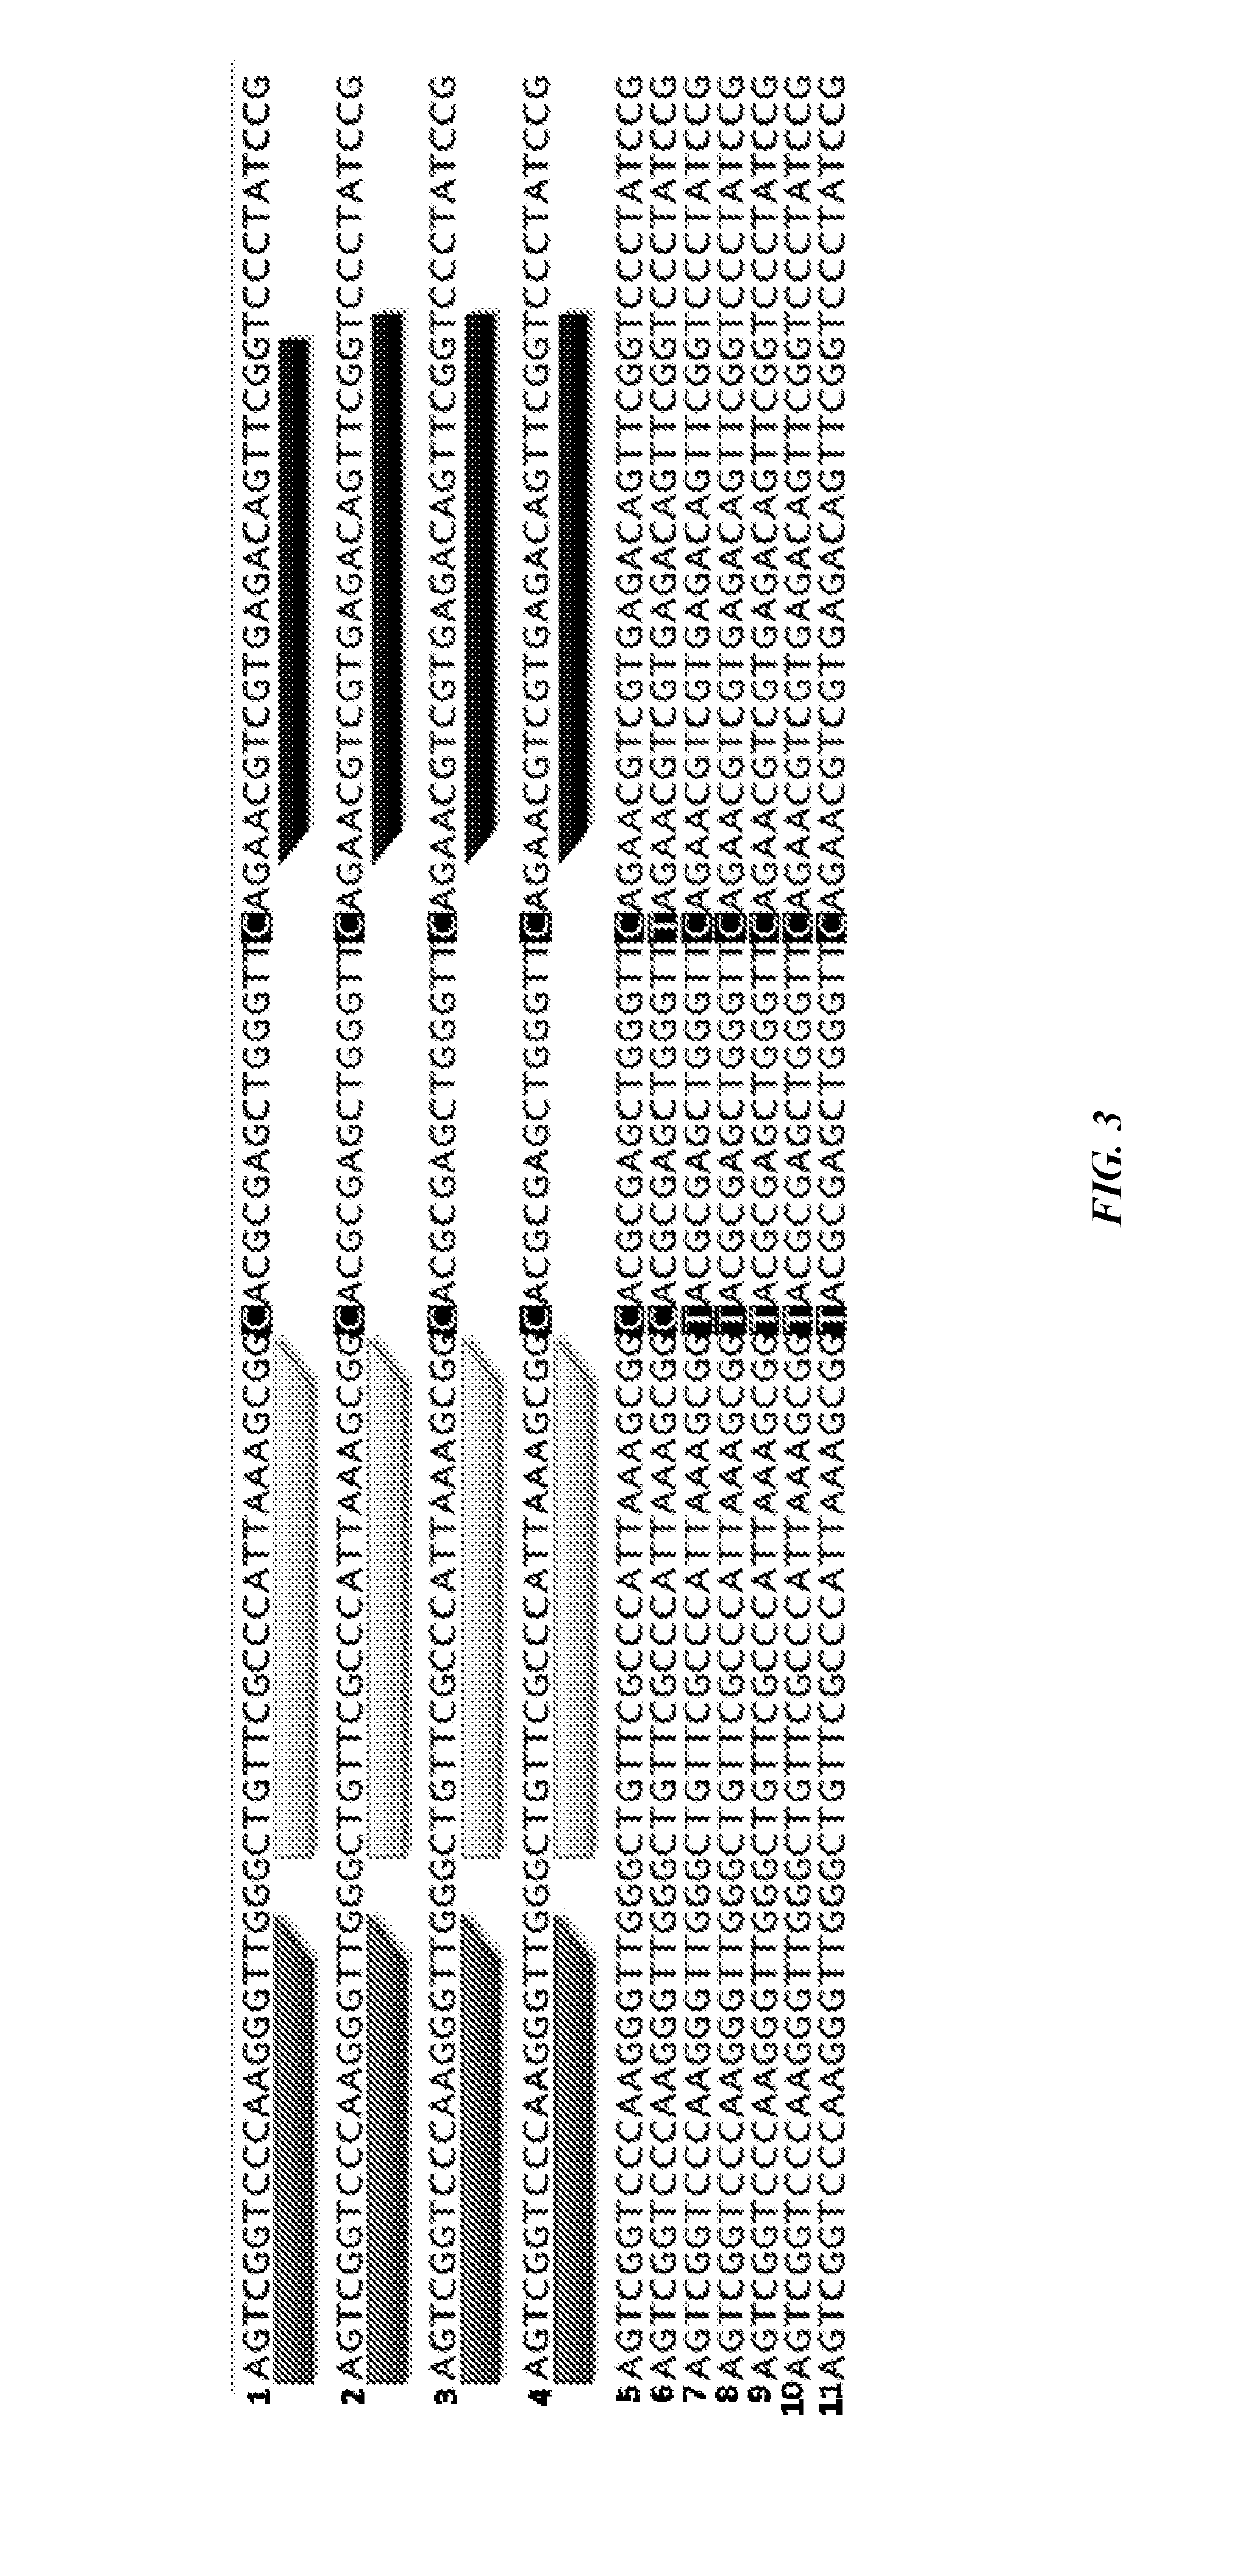 Skin disorder therapeutics and methods of use